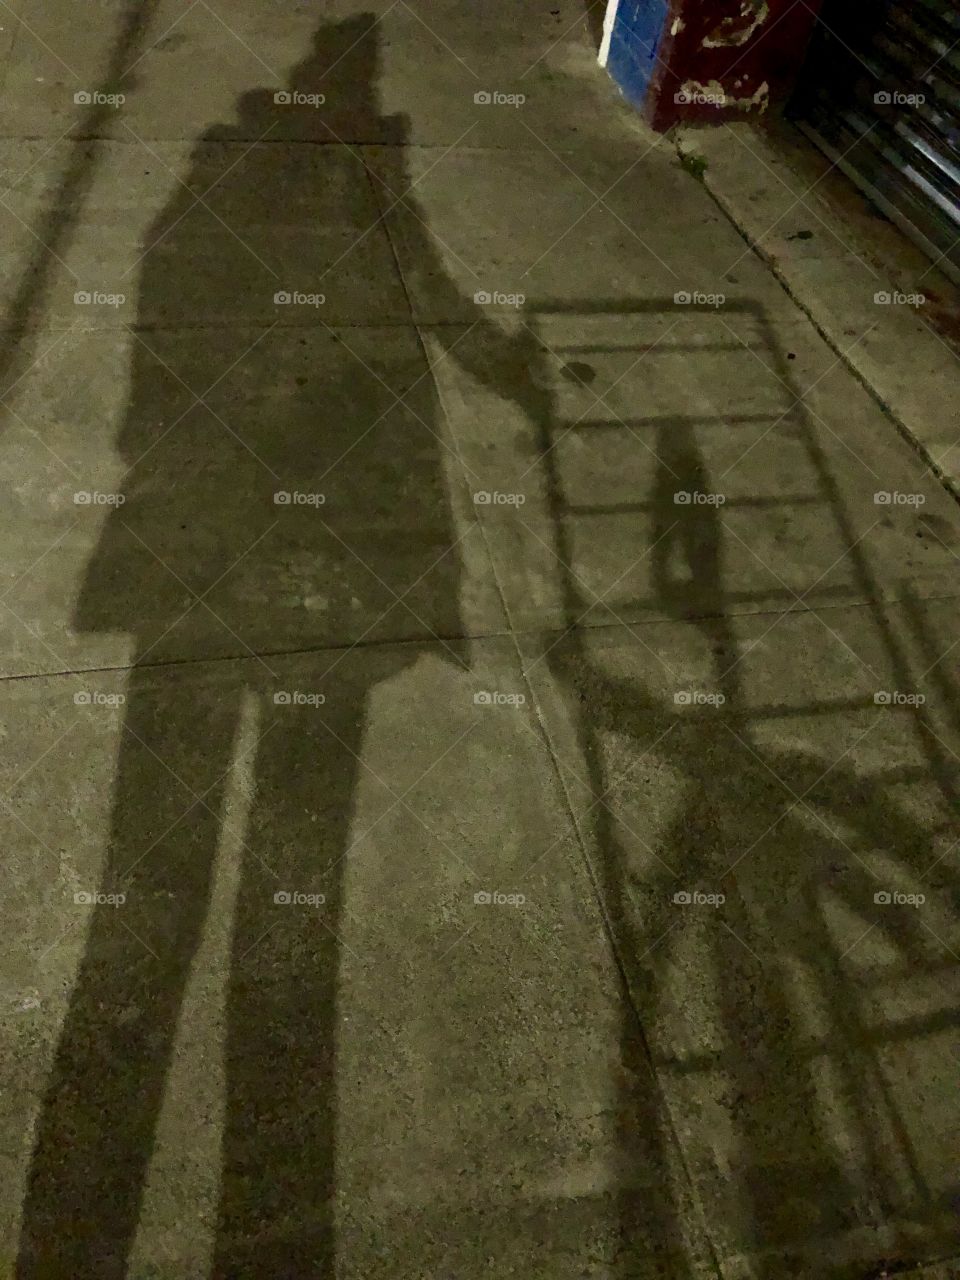 My shadow as I’m pushing a cart down the street at night 